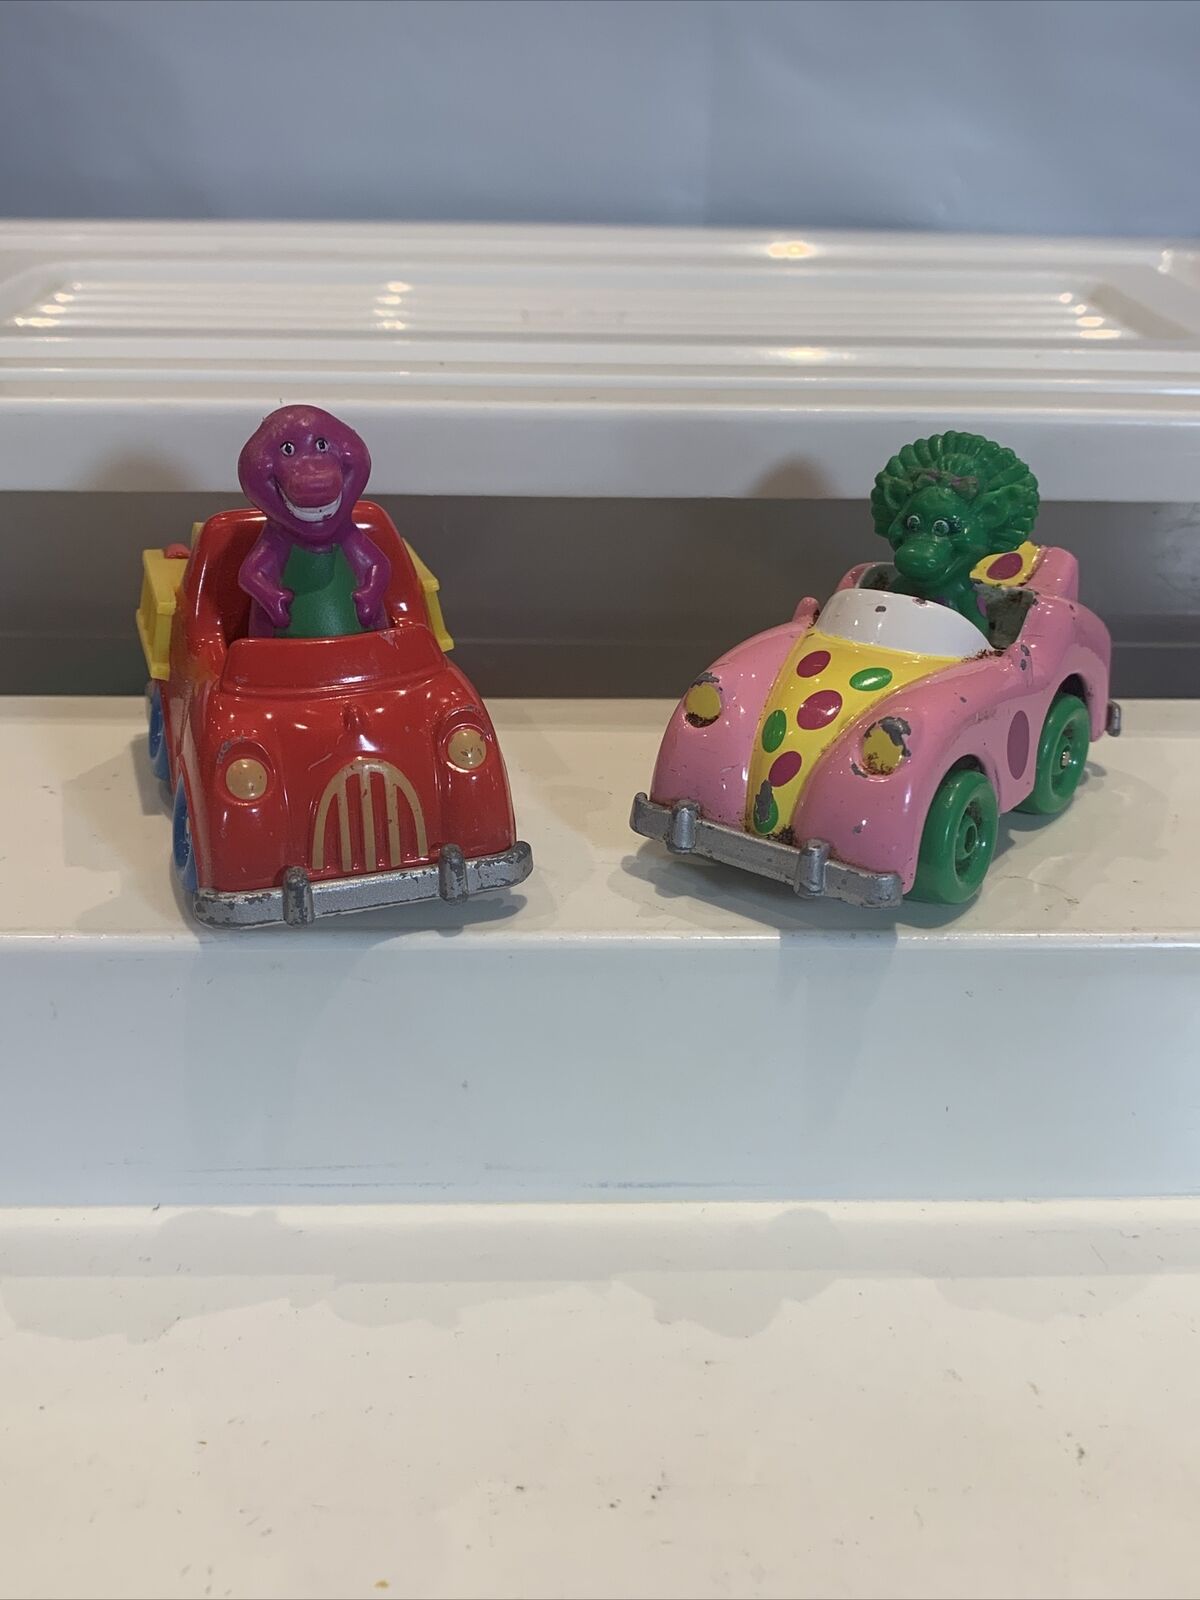 Vintage Barney & Baby Bop Die Cast Vehicles 1993 Toy/Cake Topper Collectible